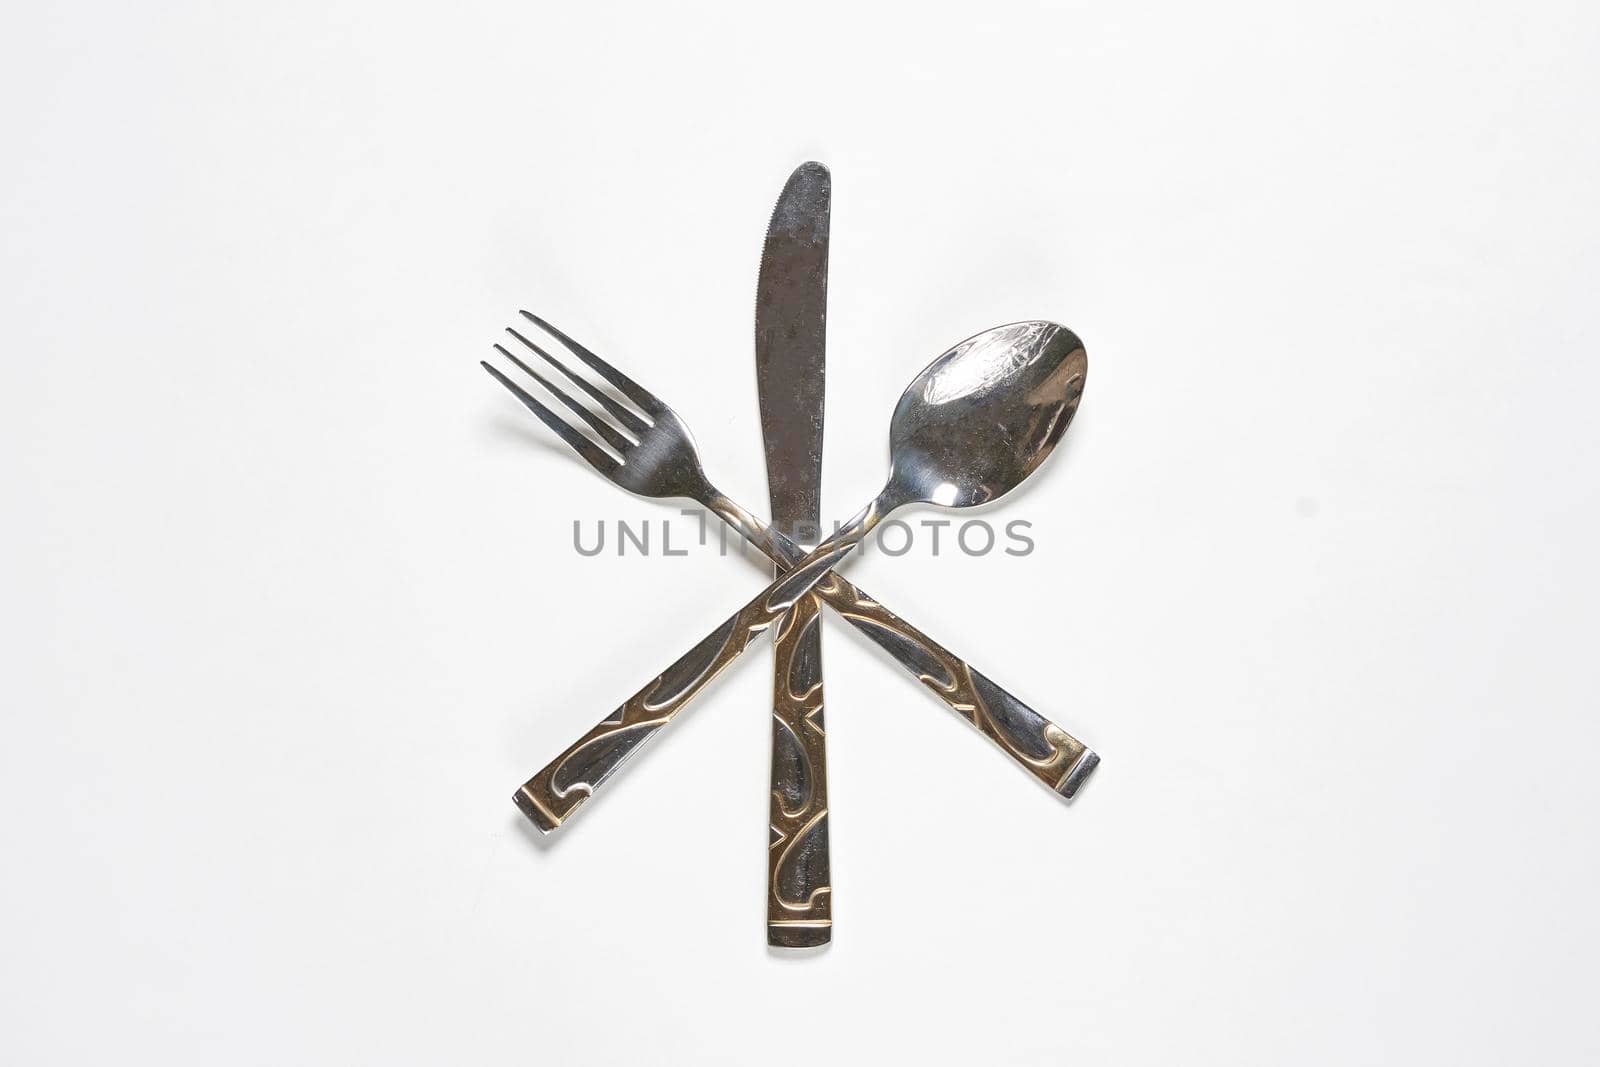 Restaurant eating items - Fork, spoon and knife on white background